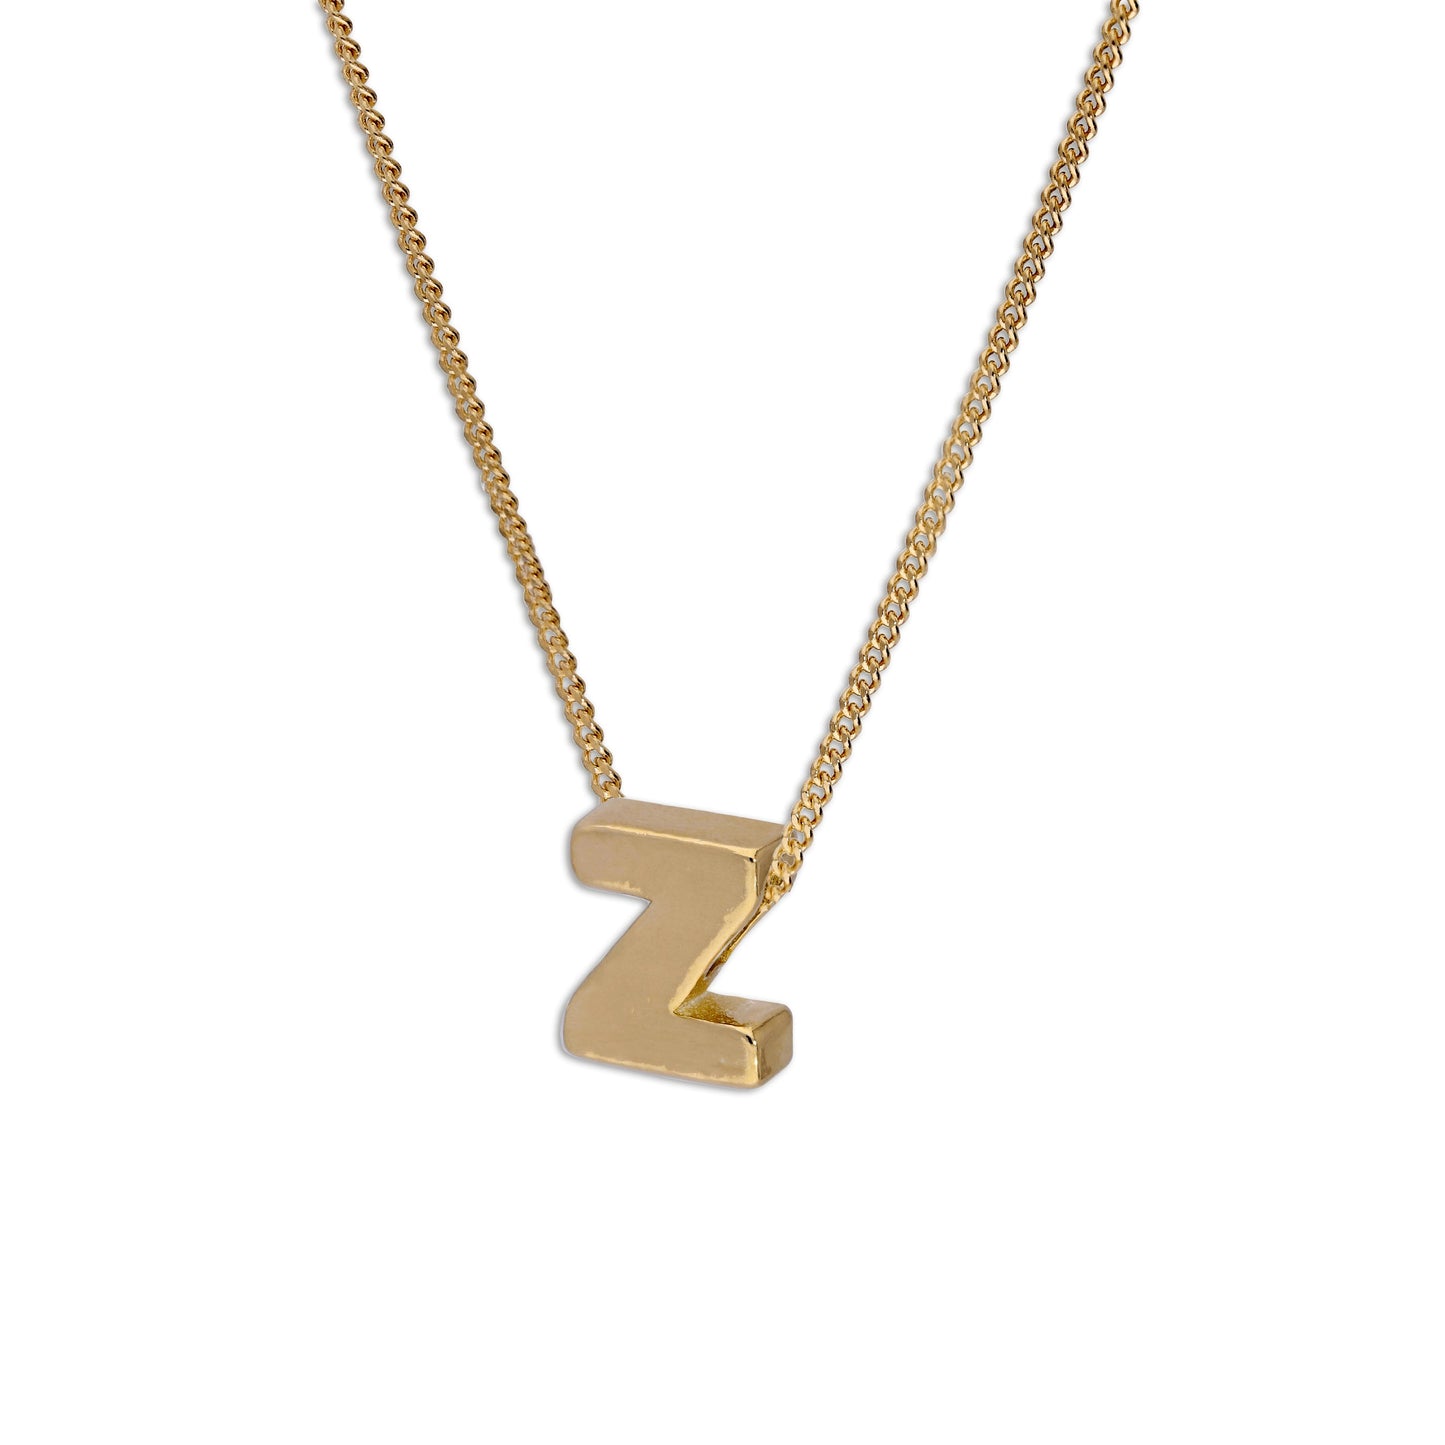 Gold Plated Sterling Silver Threader Letter Z Bead Necklace 16 - 22 Inches